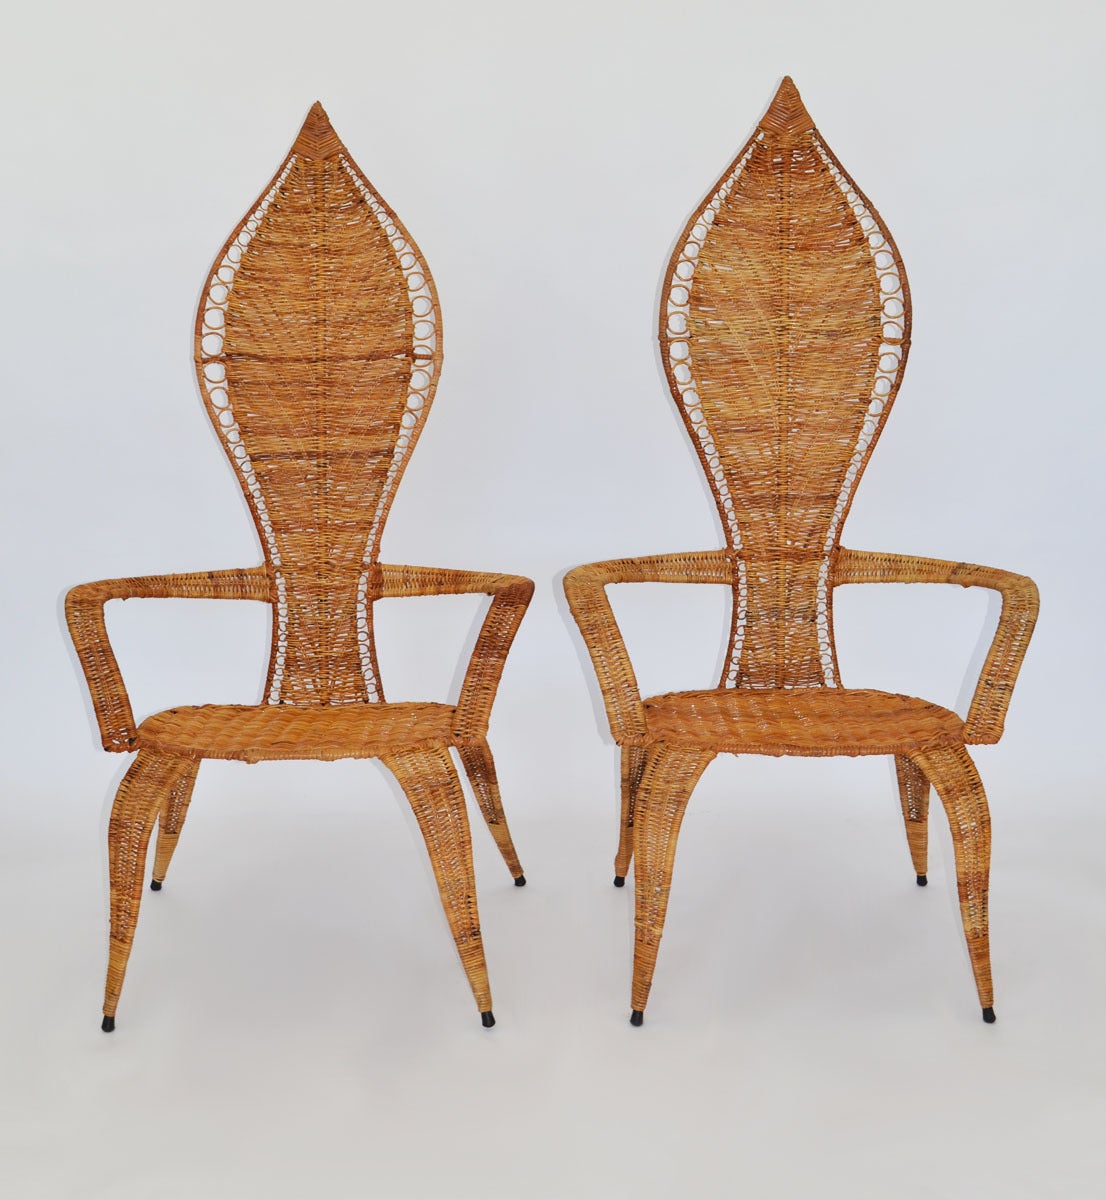 Pair of Woven Rattan Armchairs by Miller Fong